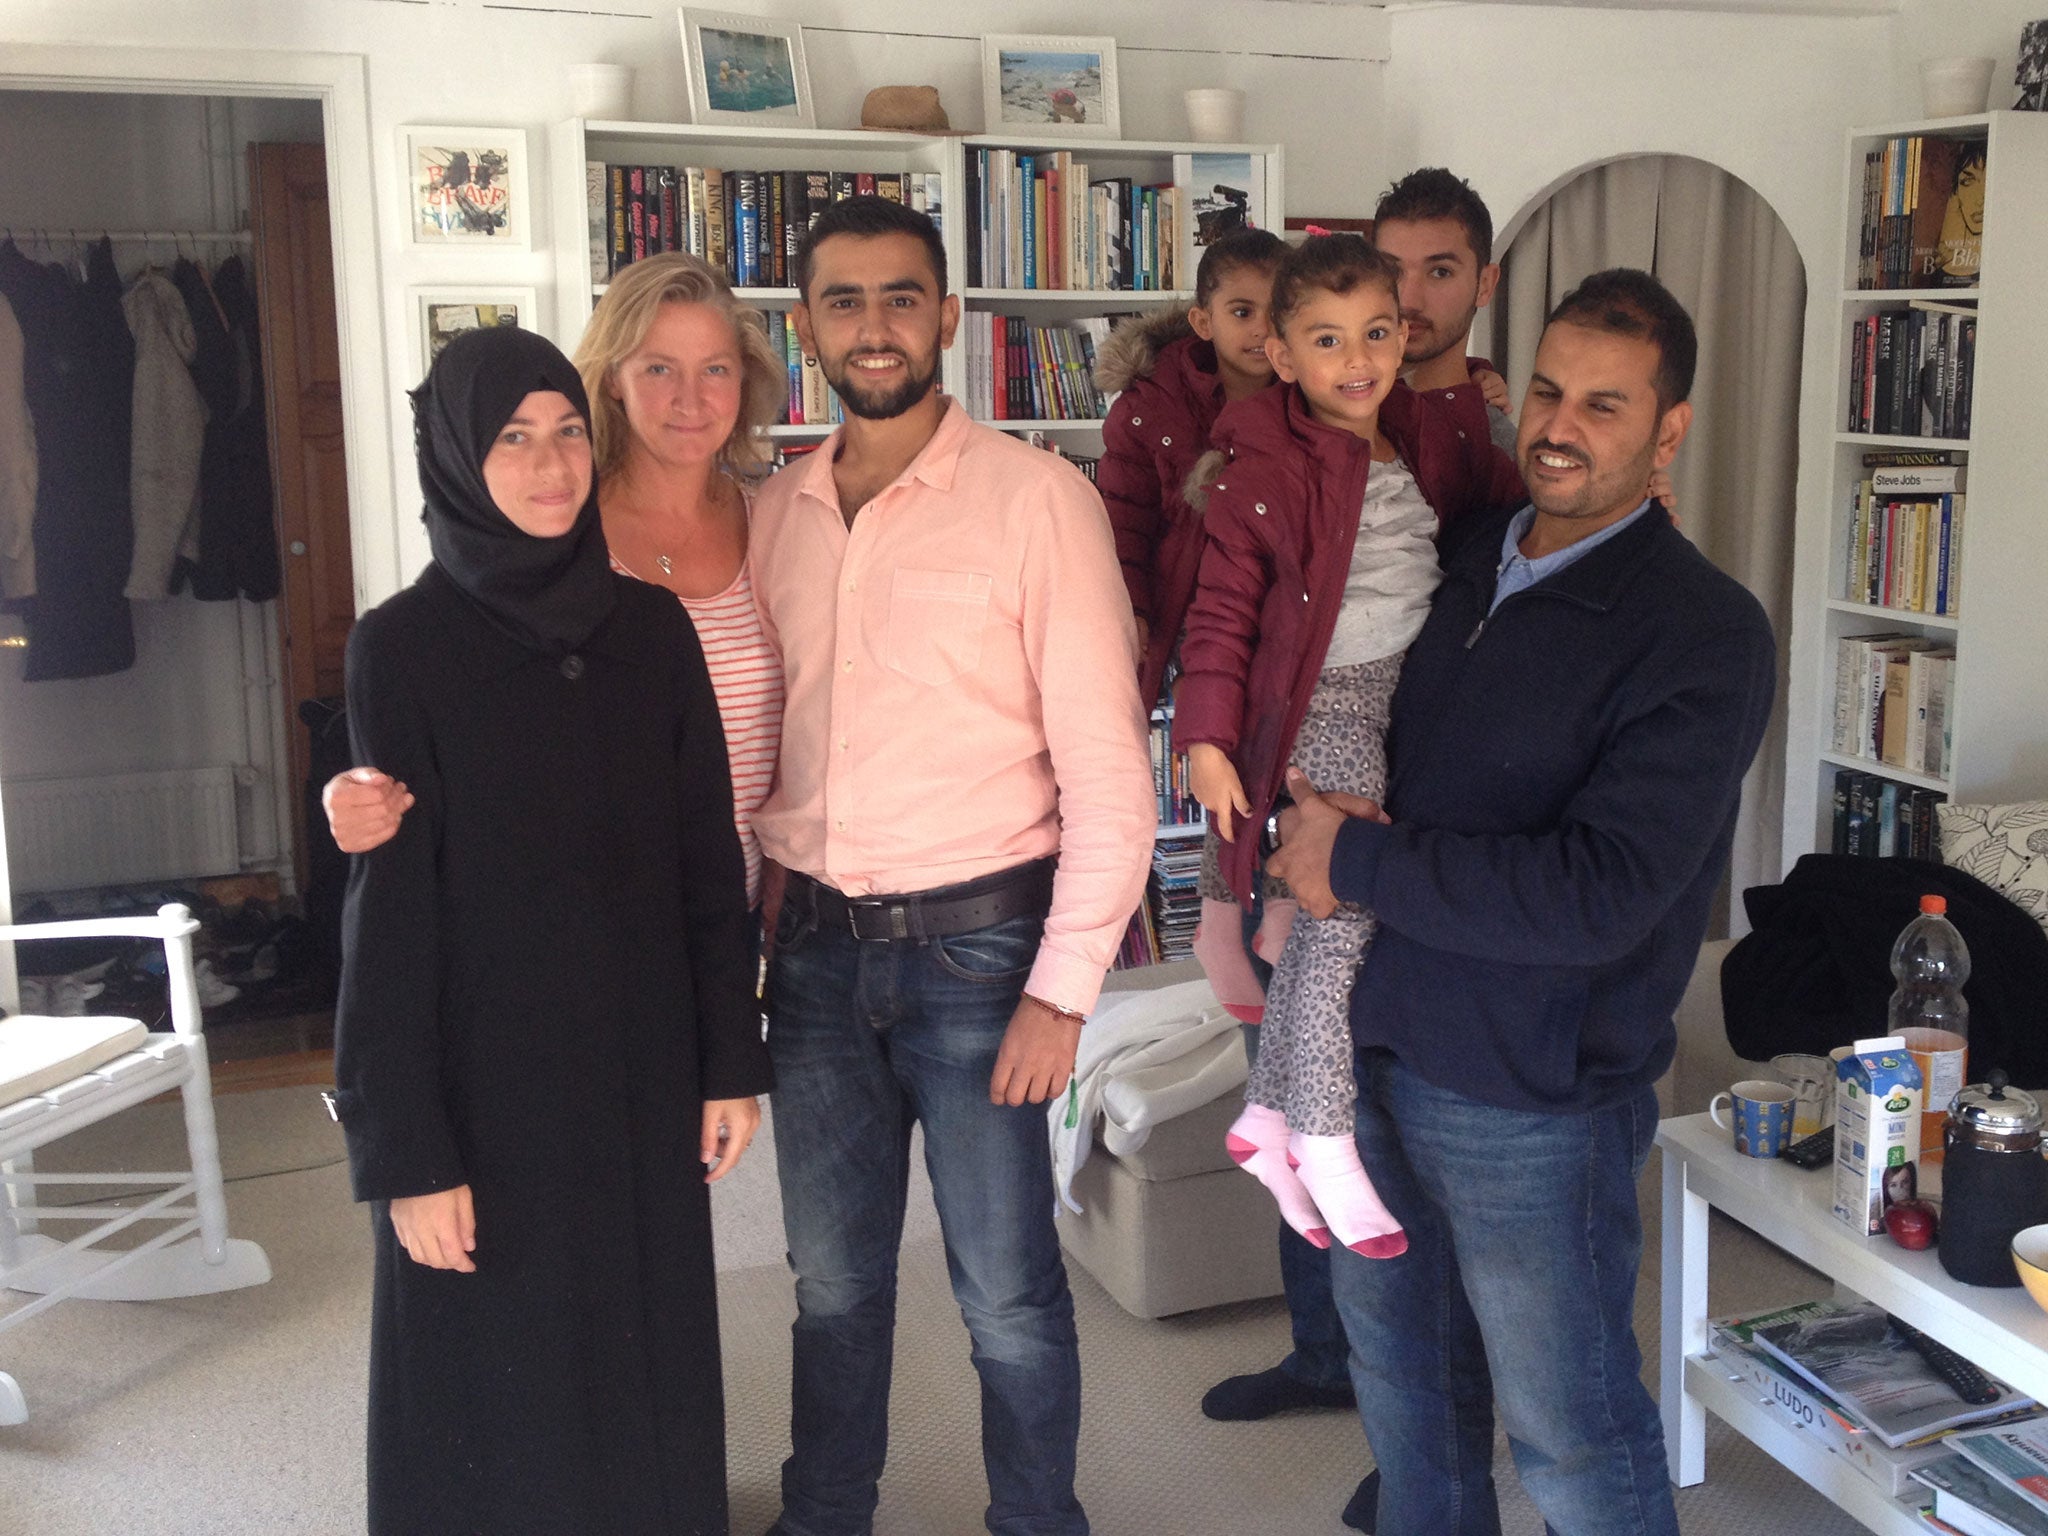 Lisbeth Zornig with the family of Syrian refugees she drove from Rodby to Copenhagen on 7 September 2015